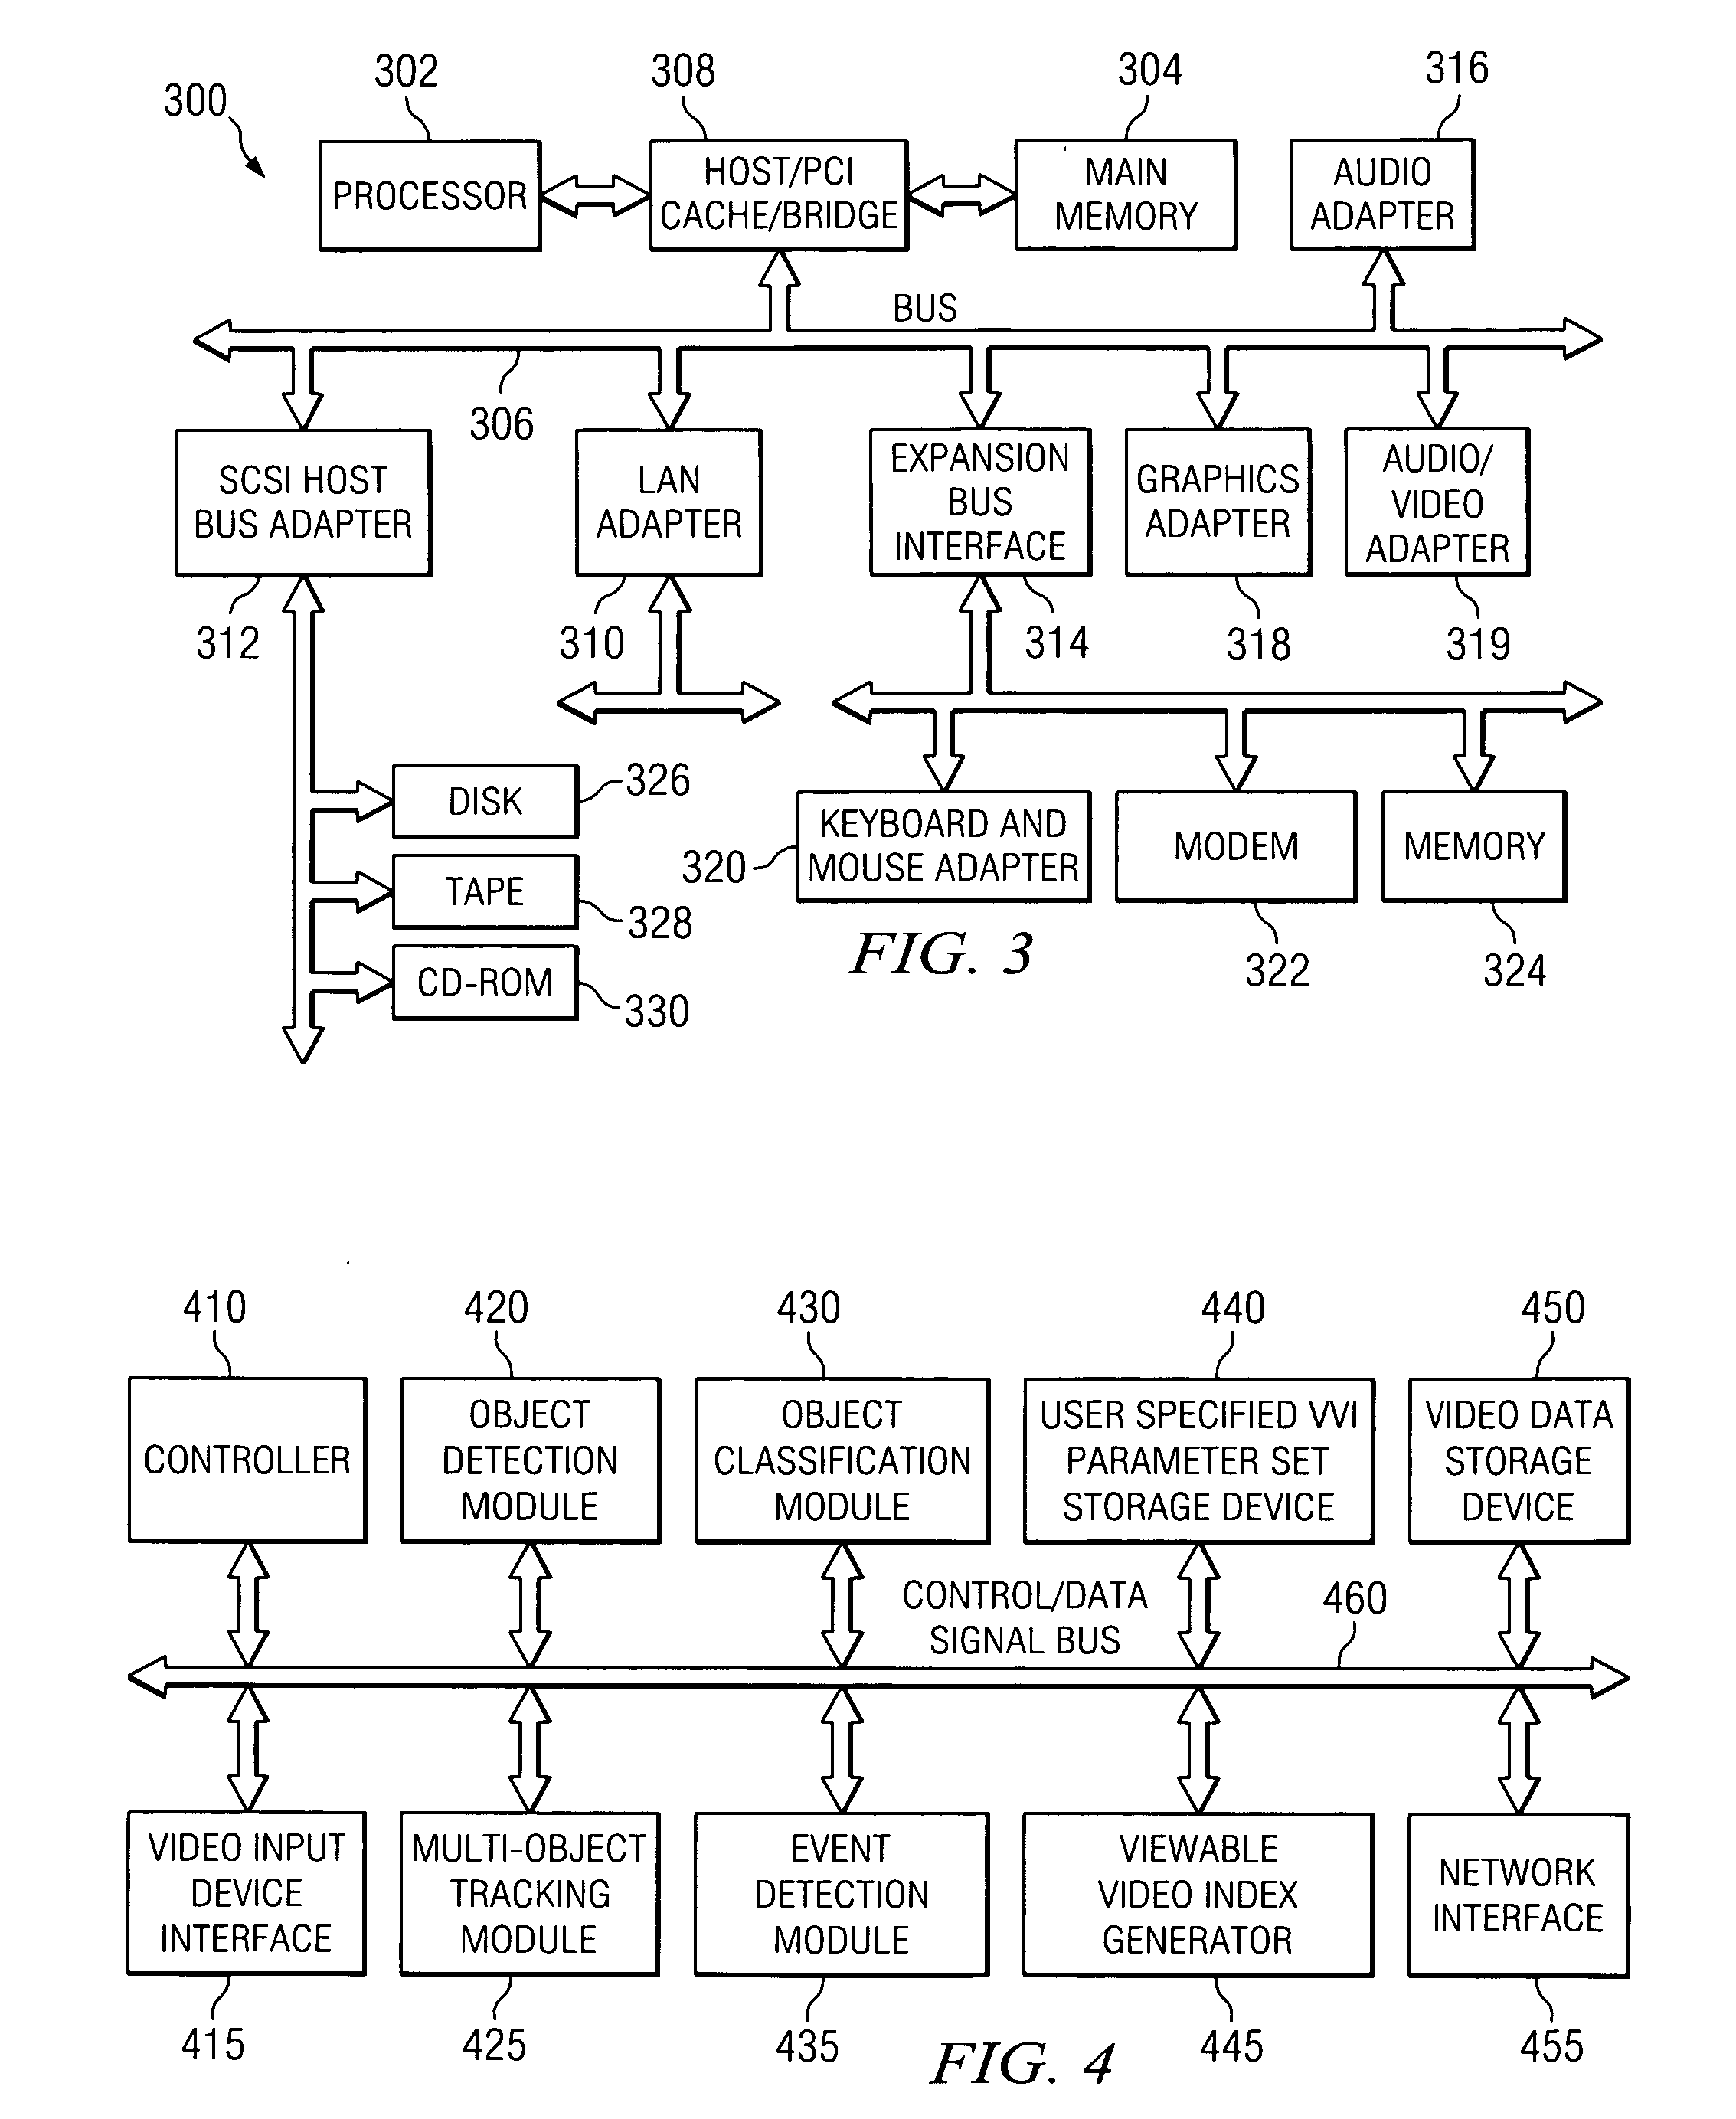 System and method for generating a viewable video index for low bandwidth applications